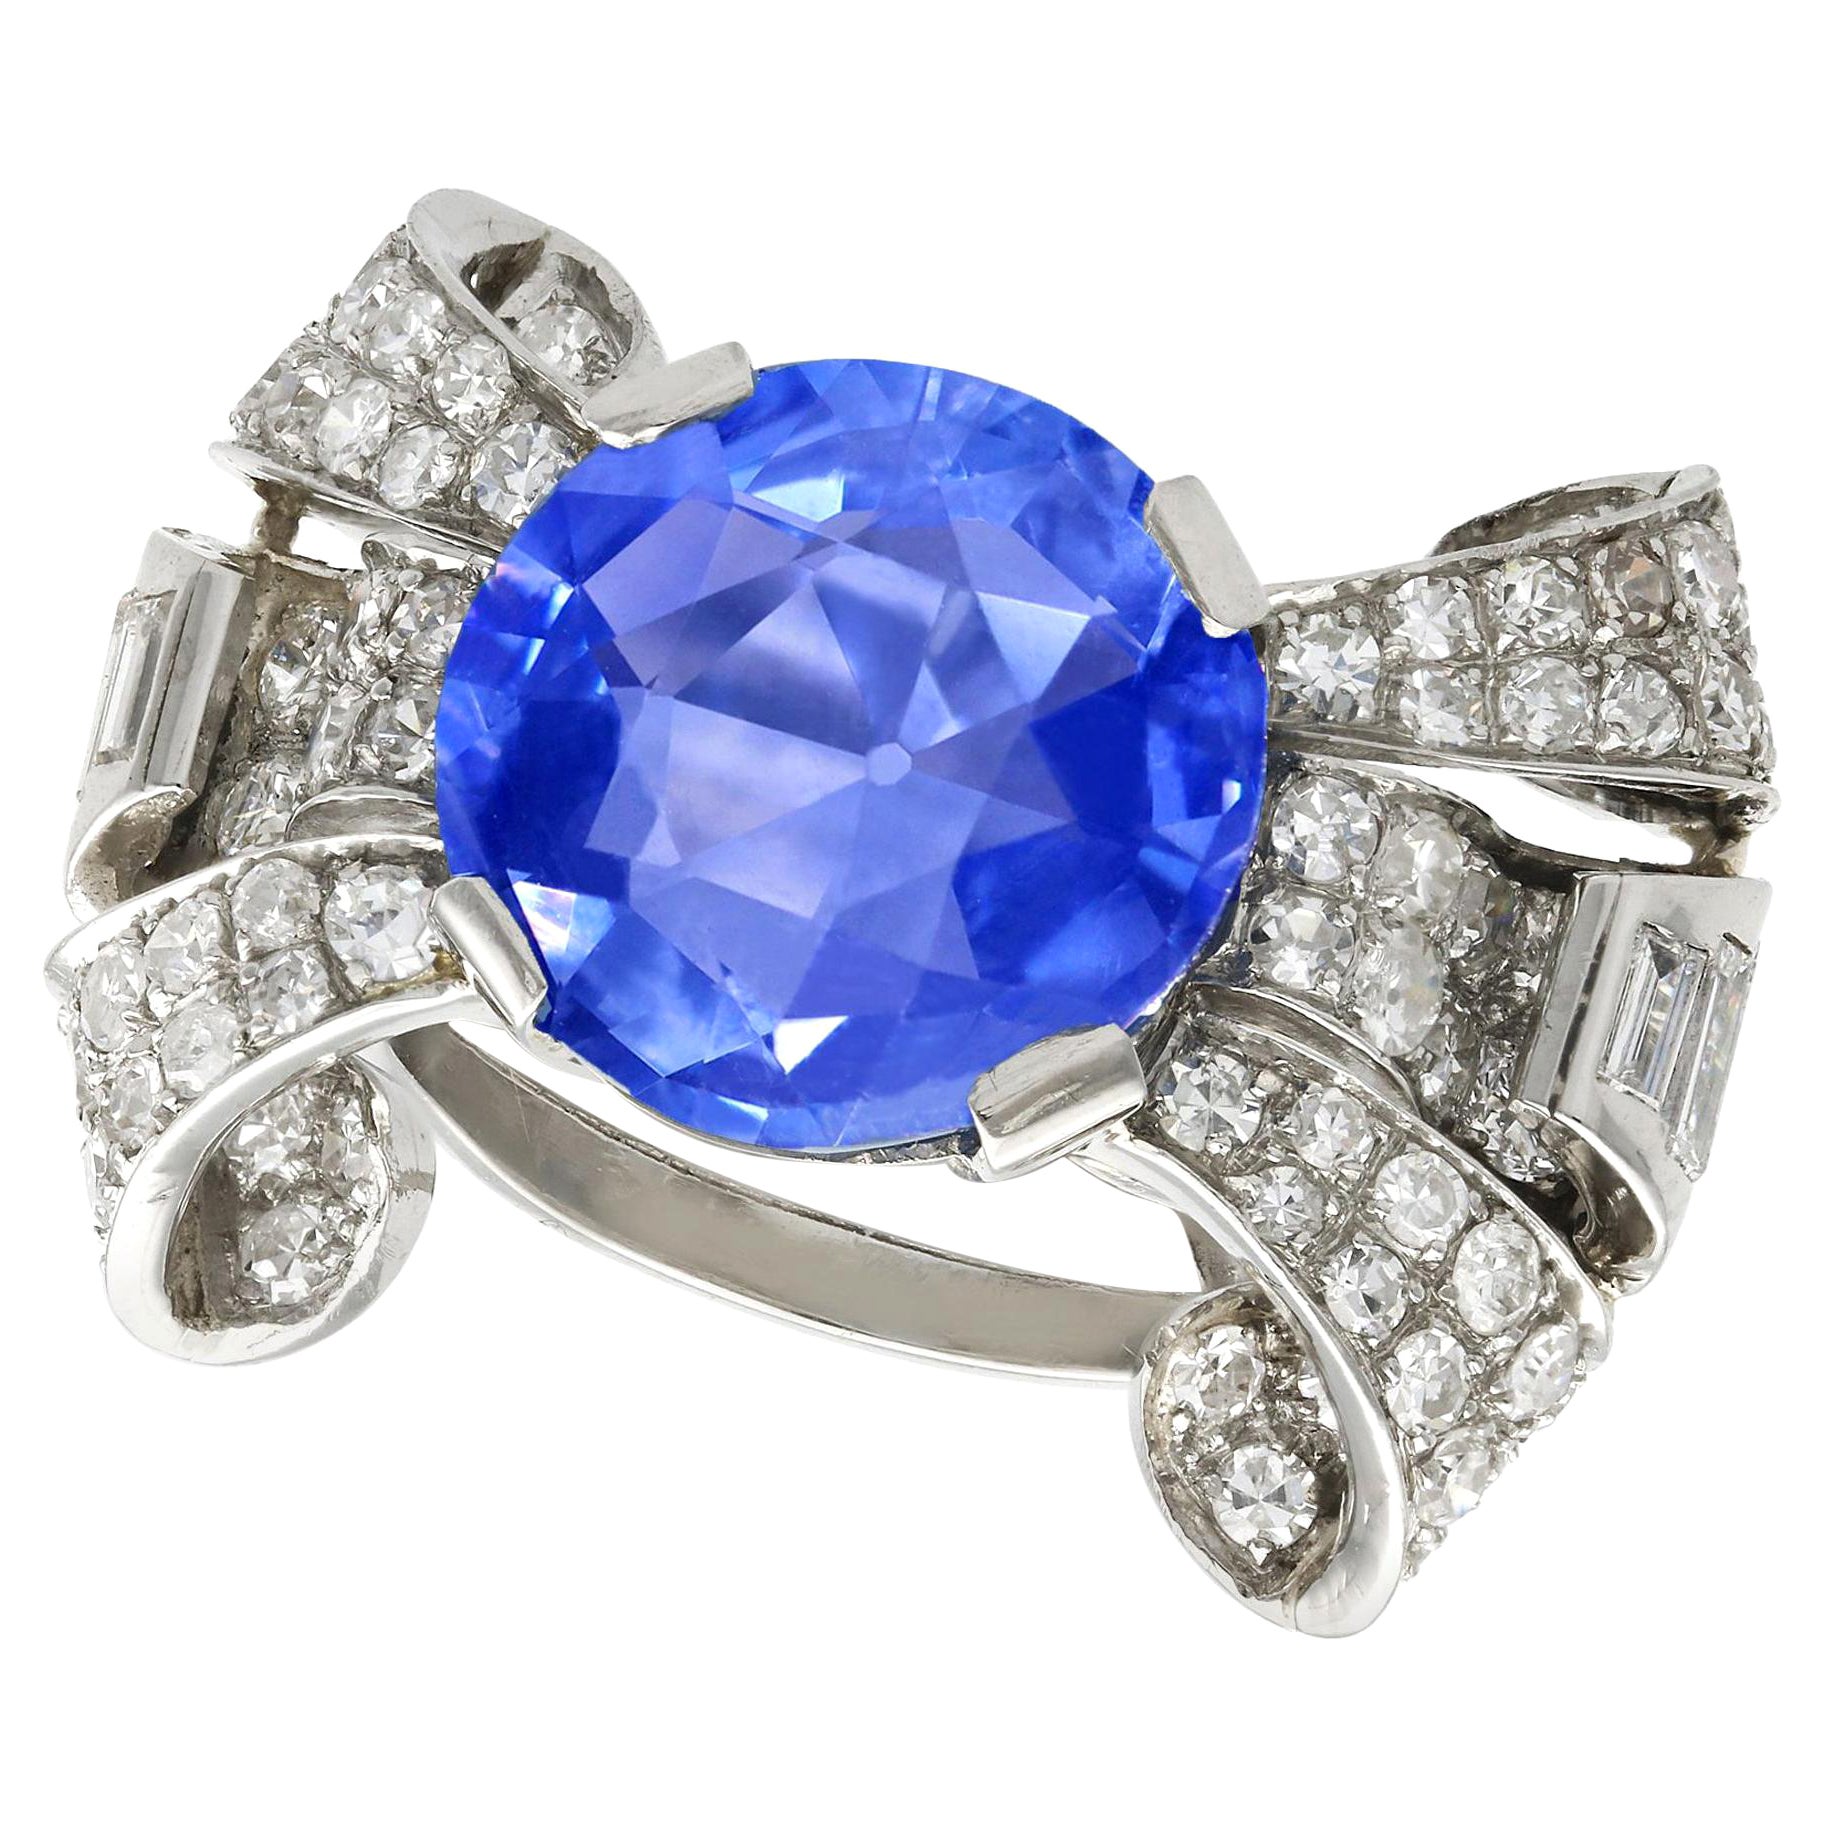 A stunning antique 8.50 carat Ceylon sapphire and 1.95 carat diamond, platinum cocktail ring; part of our diverse antique jewelry and estate jewelry collections.

This stunning, fine and impressive antique sapphire cocktail ring has been crafted in